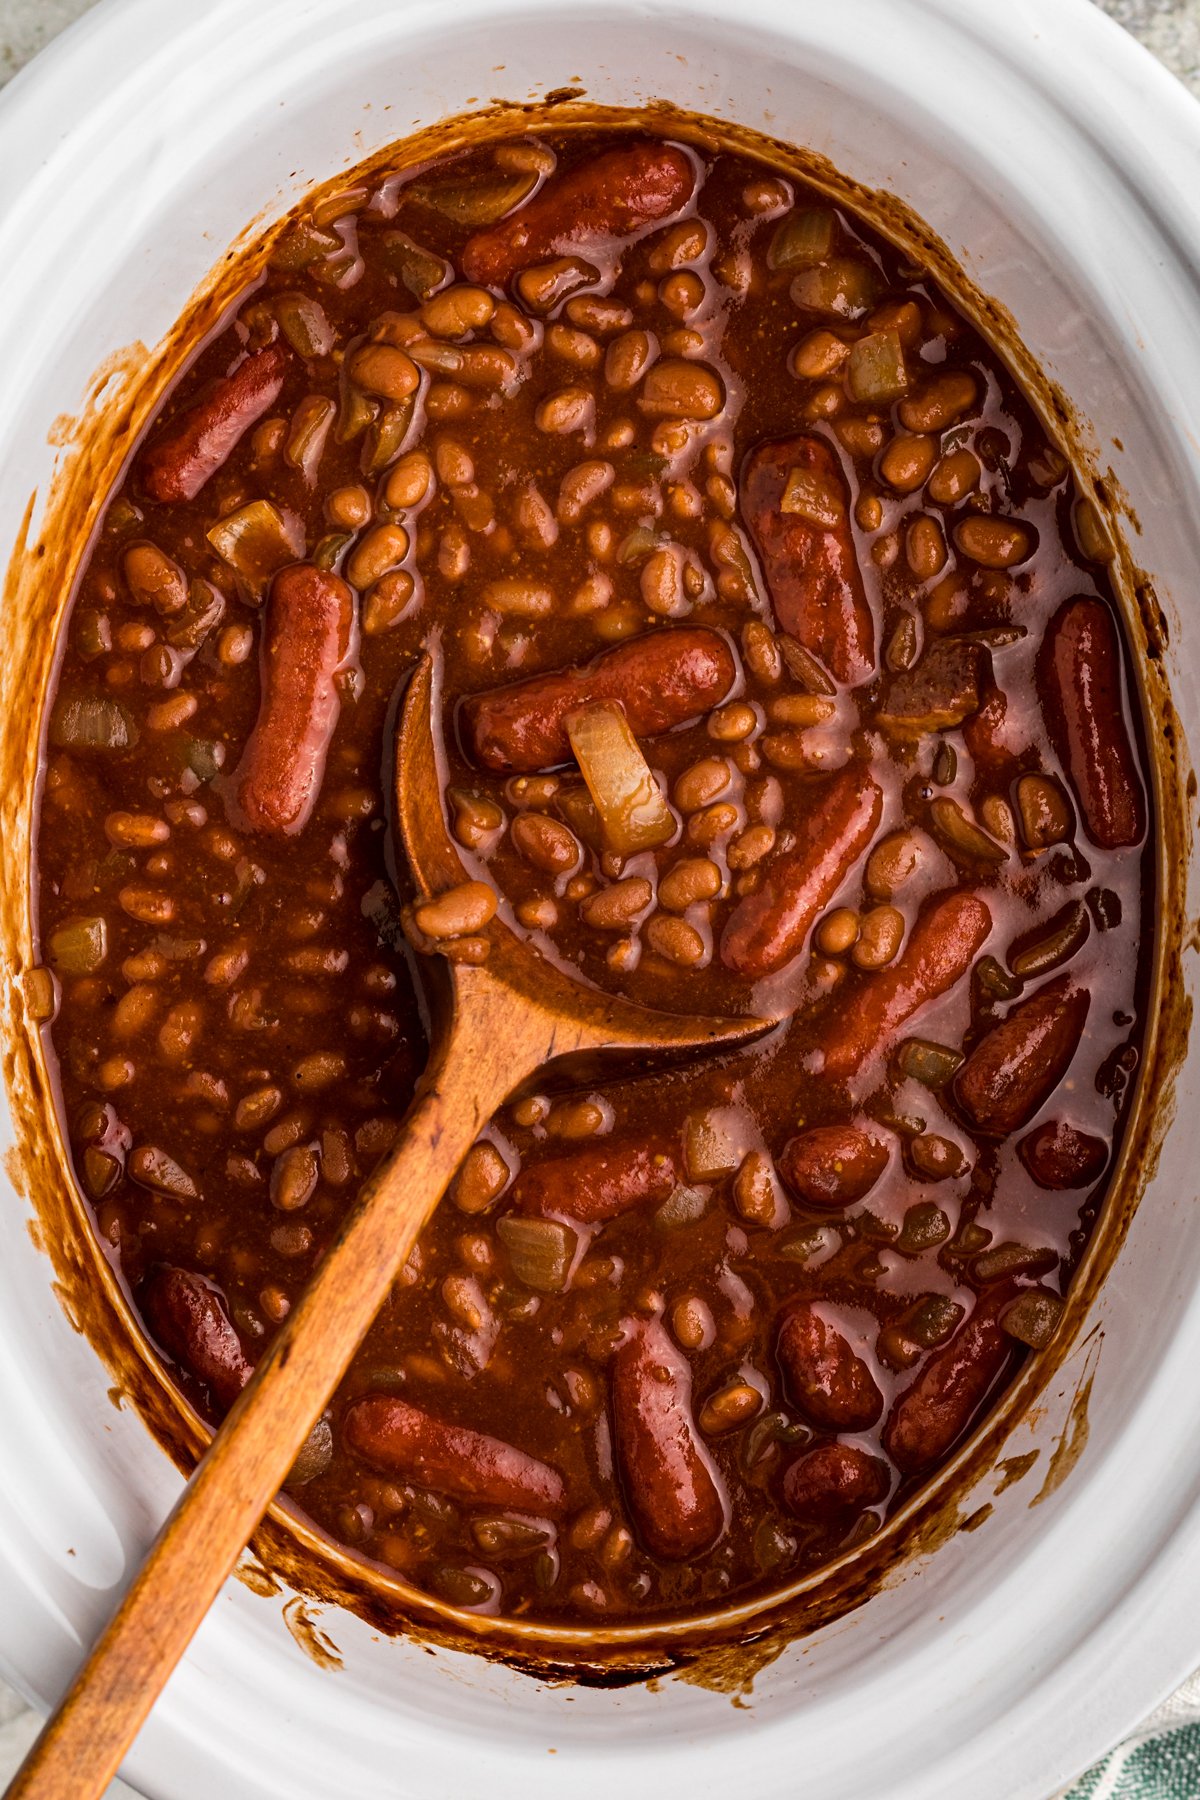 Baked beans and little smokies in a slow cooker with a wooden spoon.